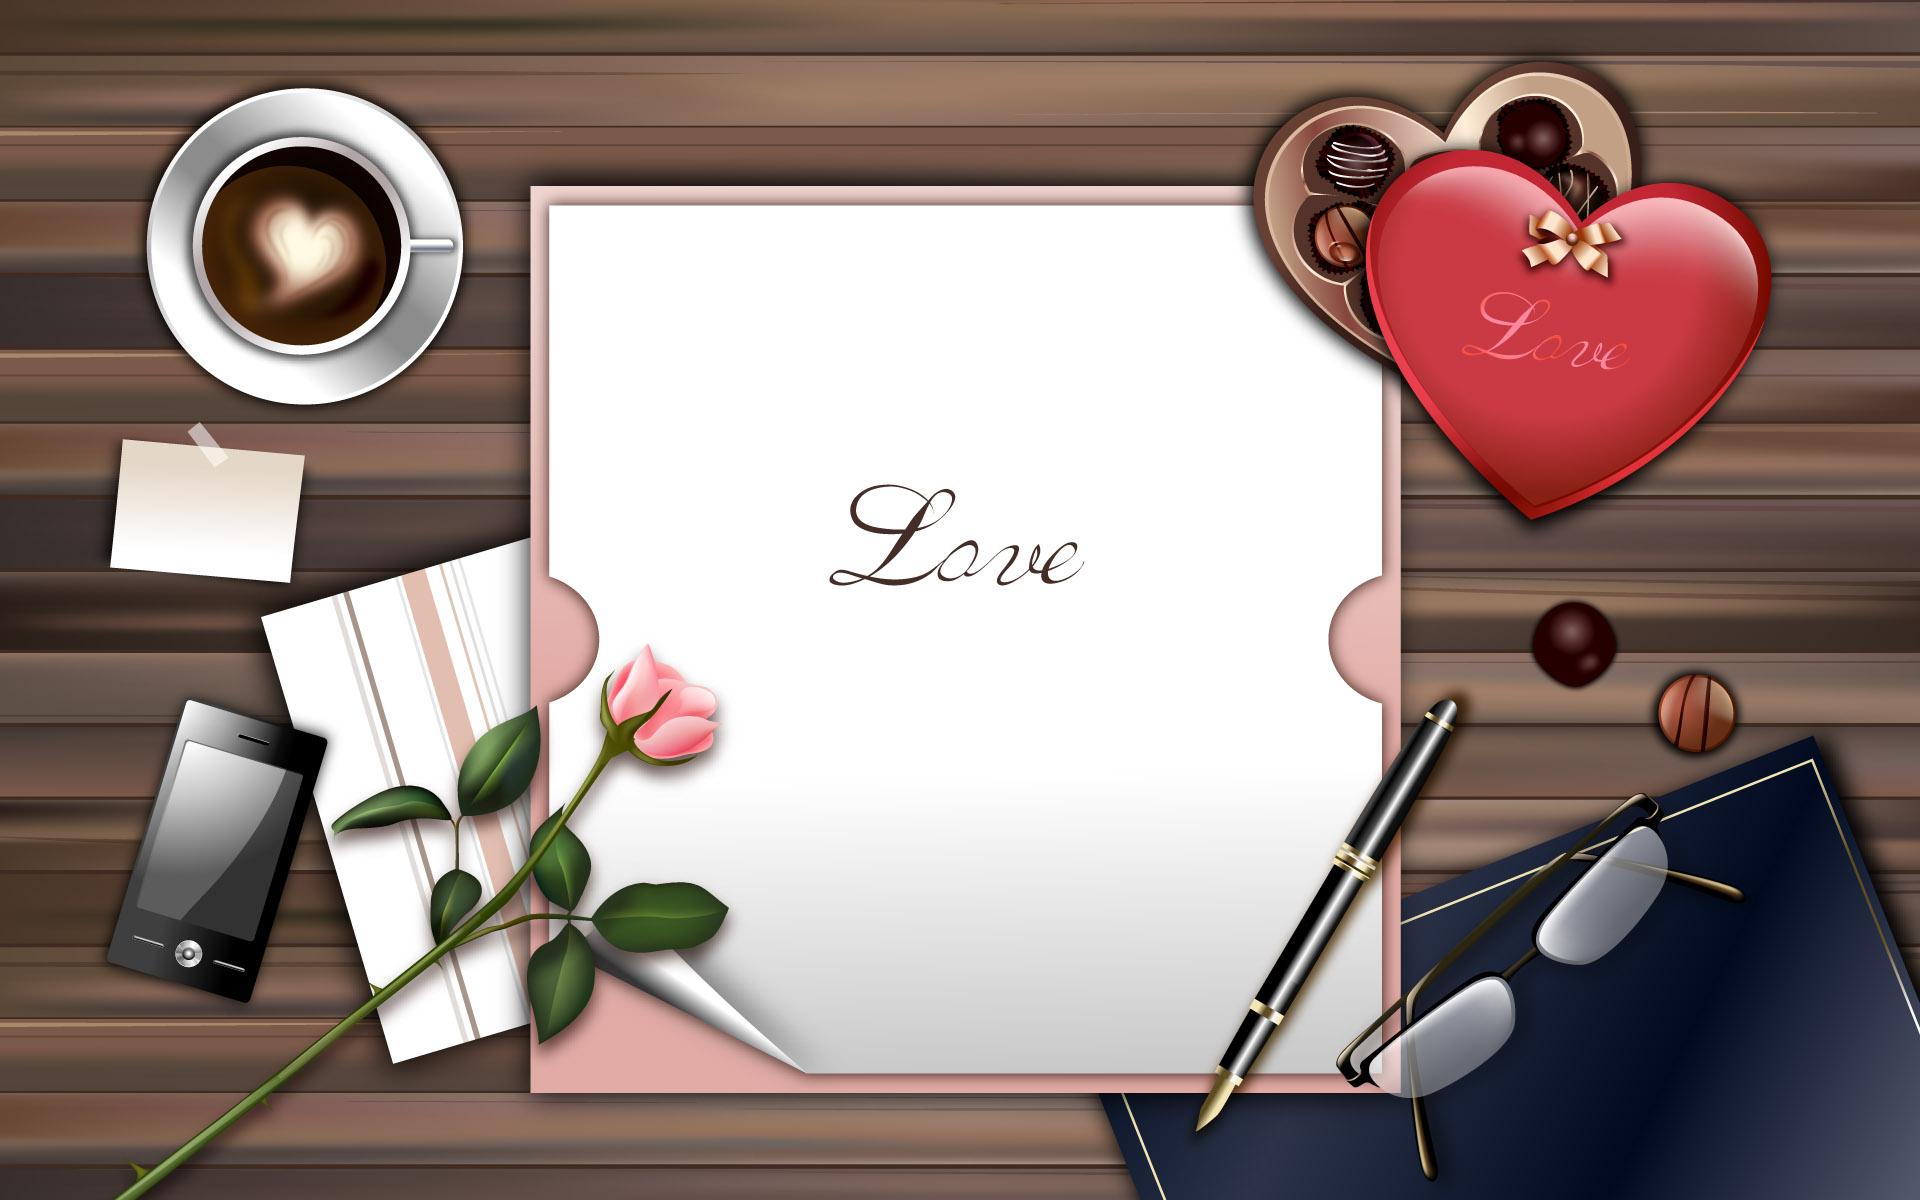 Letter of Love on St. Valentine's Day wallpaper and image